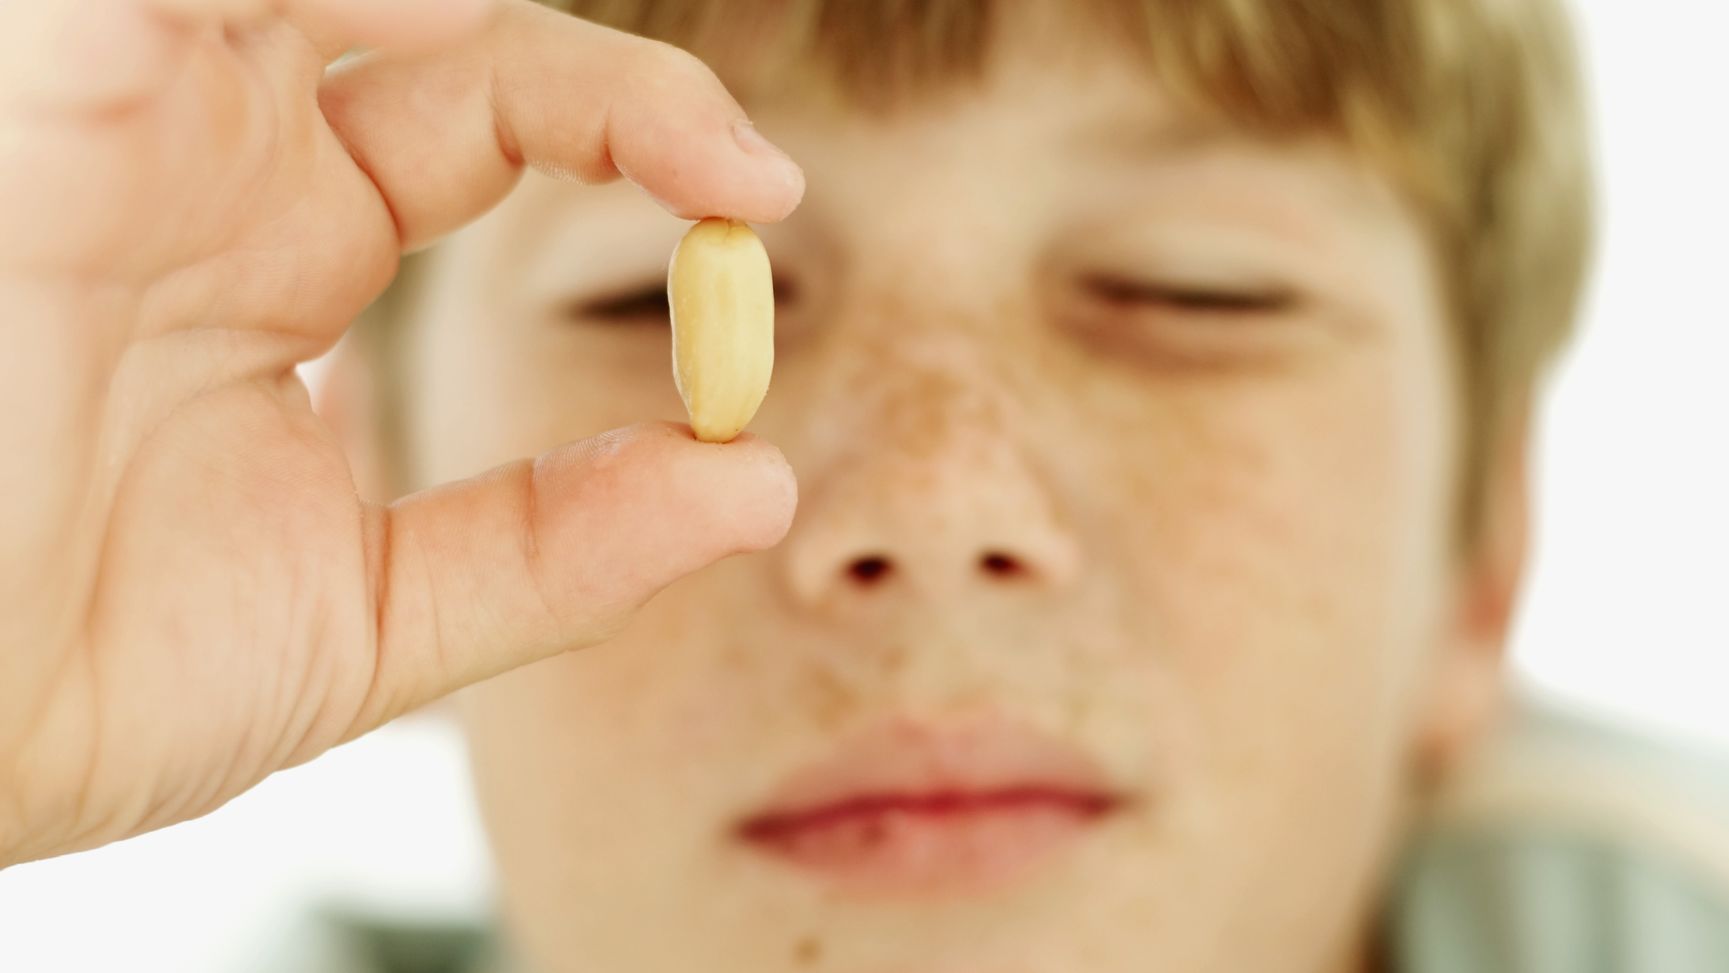 Learning about food allergies is one way parents of allergic children can feel more in control.